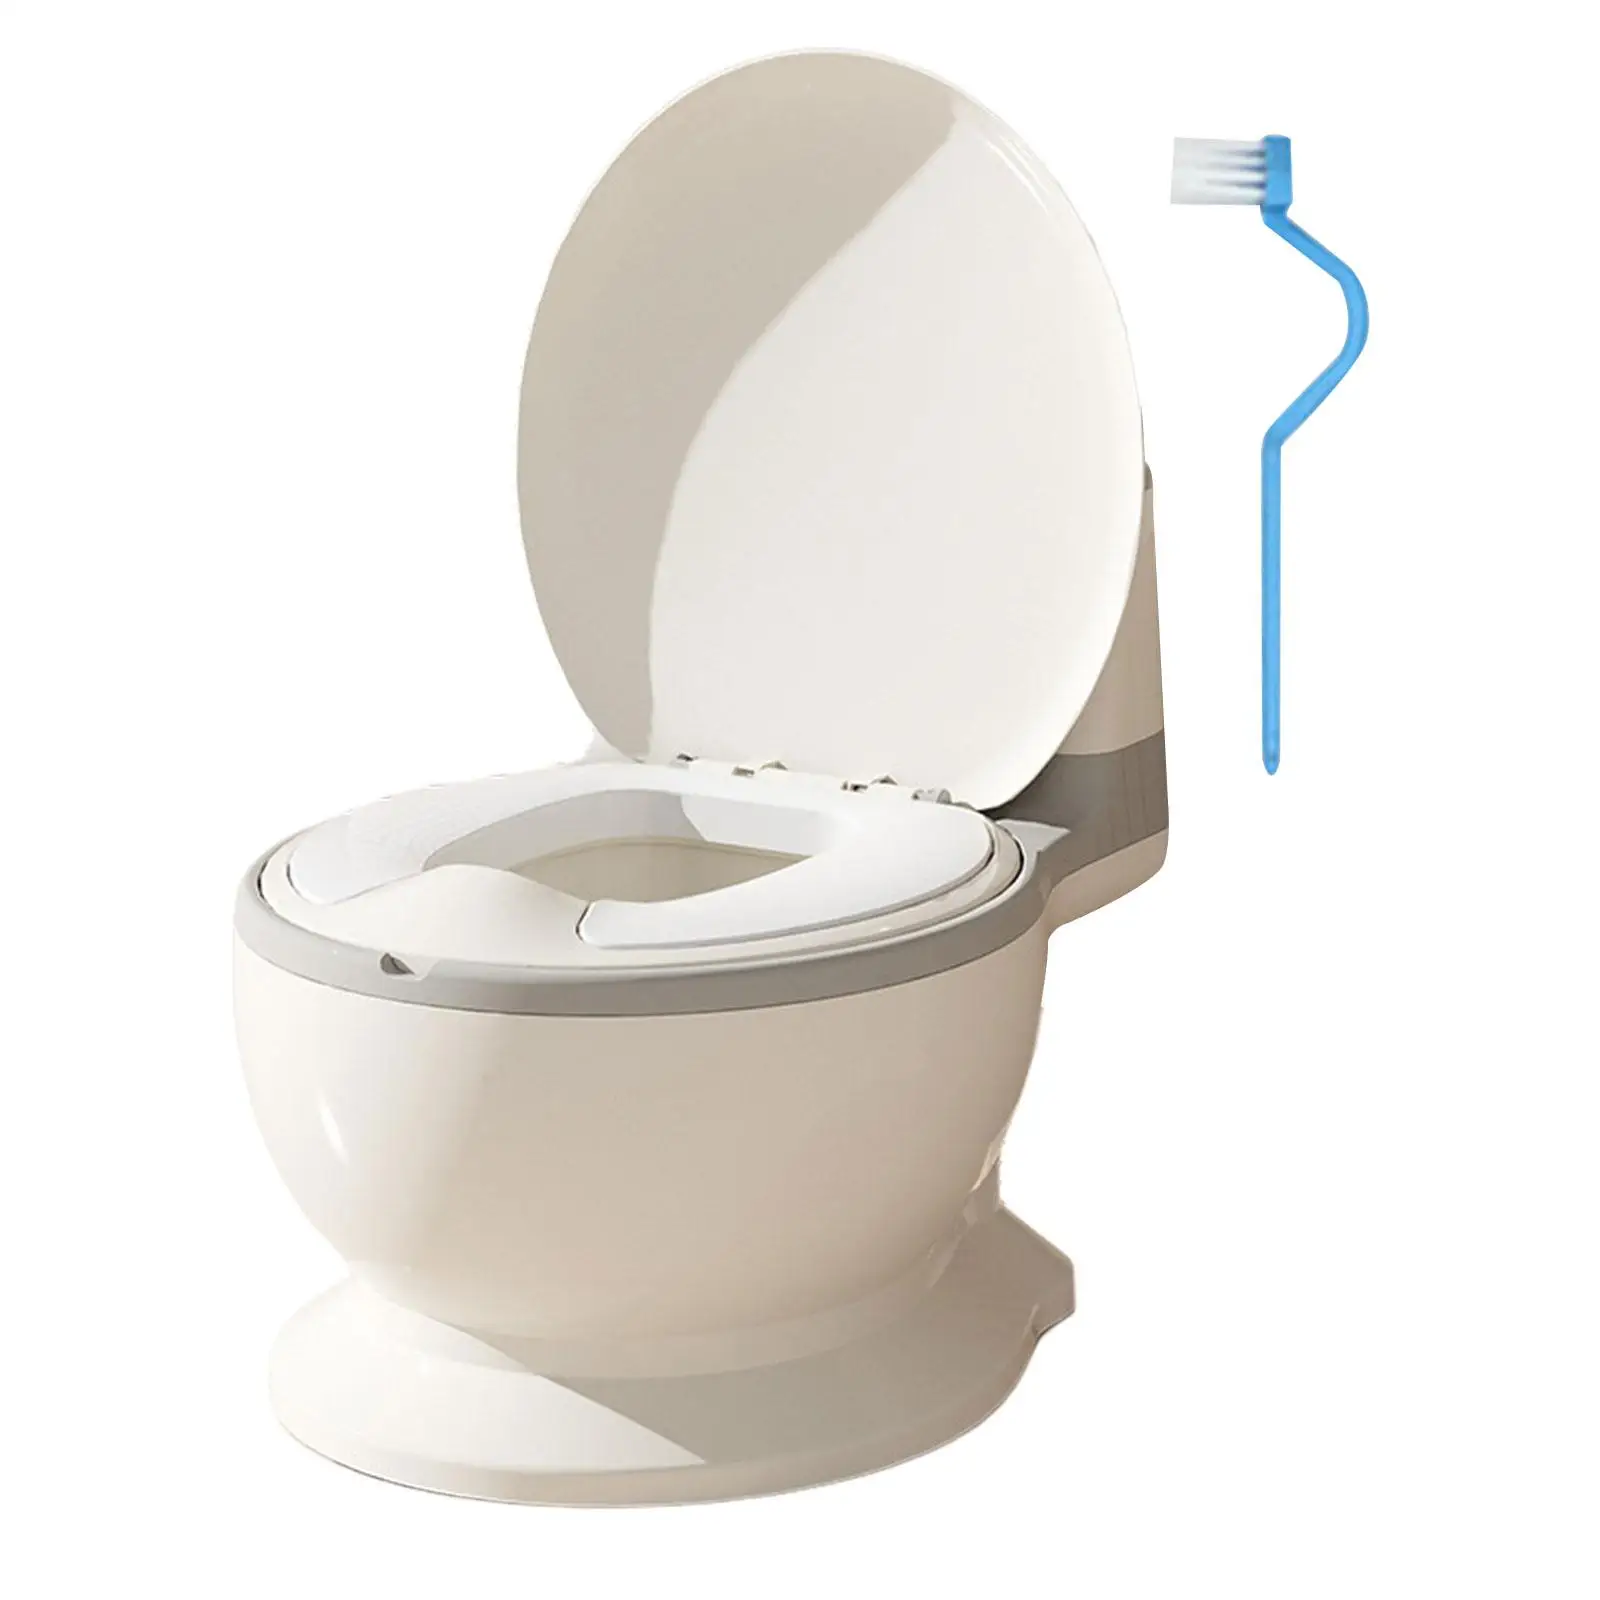 Toilet Training Potty with Wipe Storage Lightweight Comfortable Real Feel Potty Infants Toilet Seat for Bedroom Babies Infants